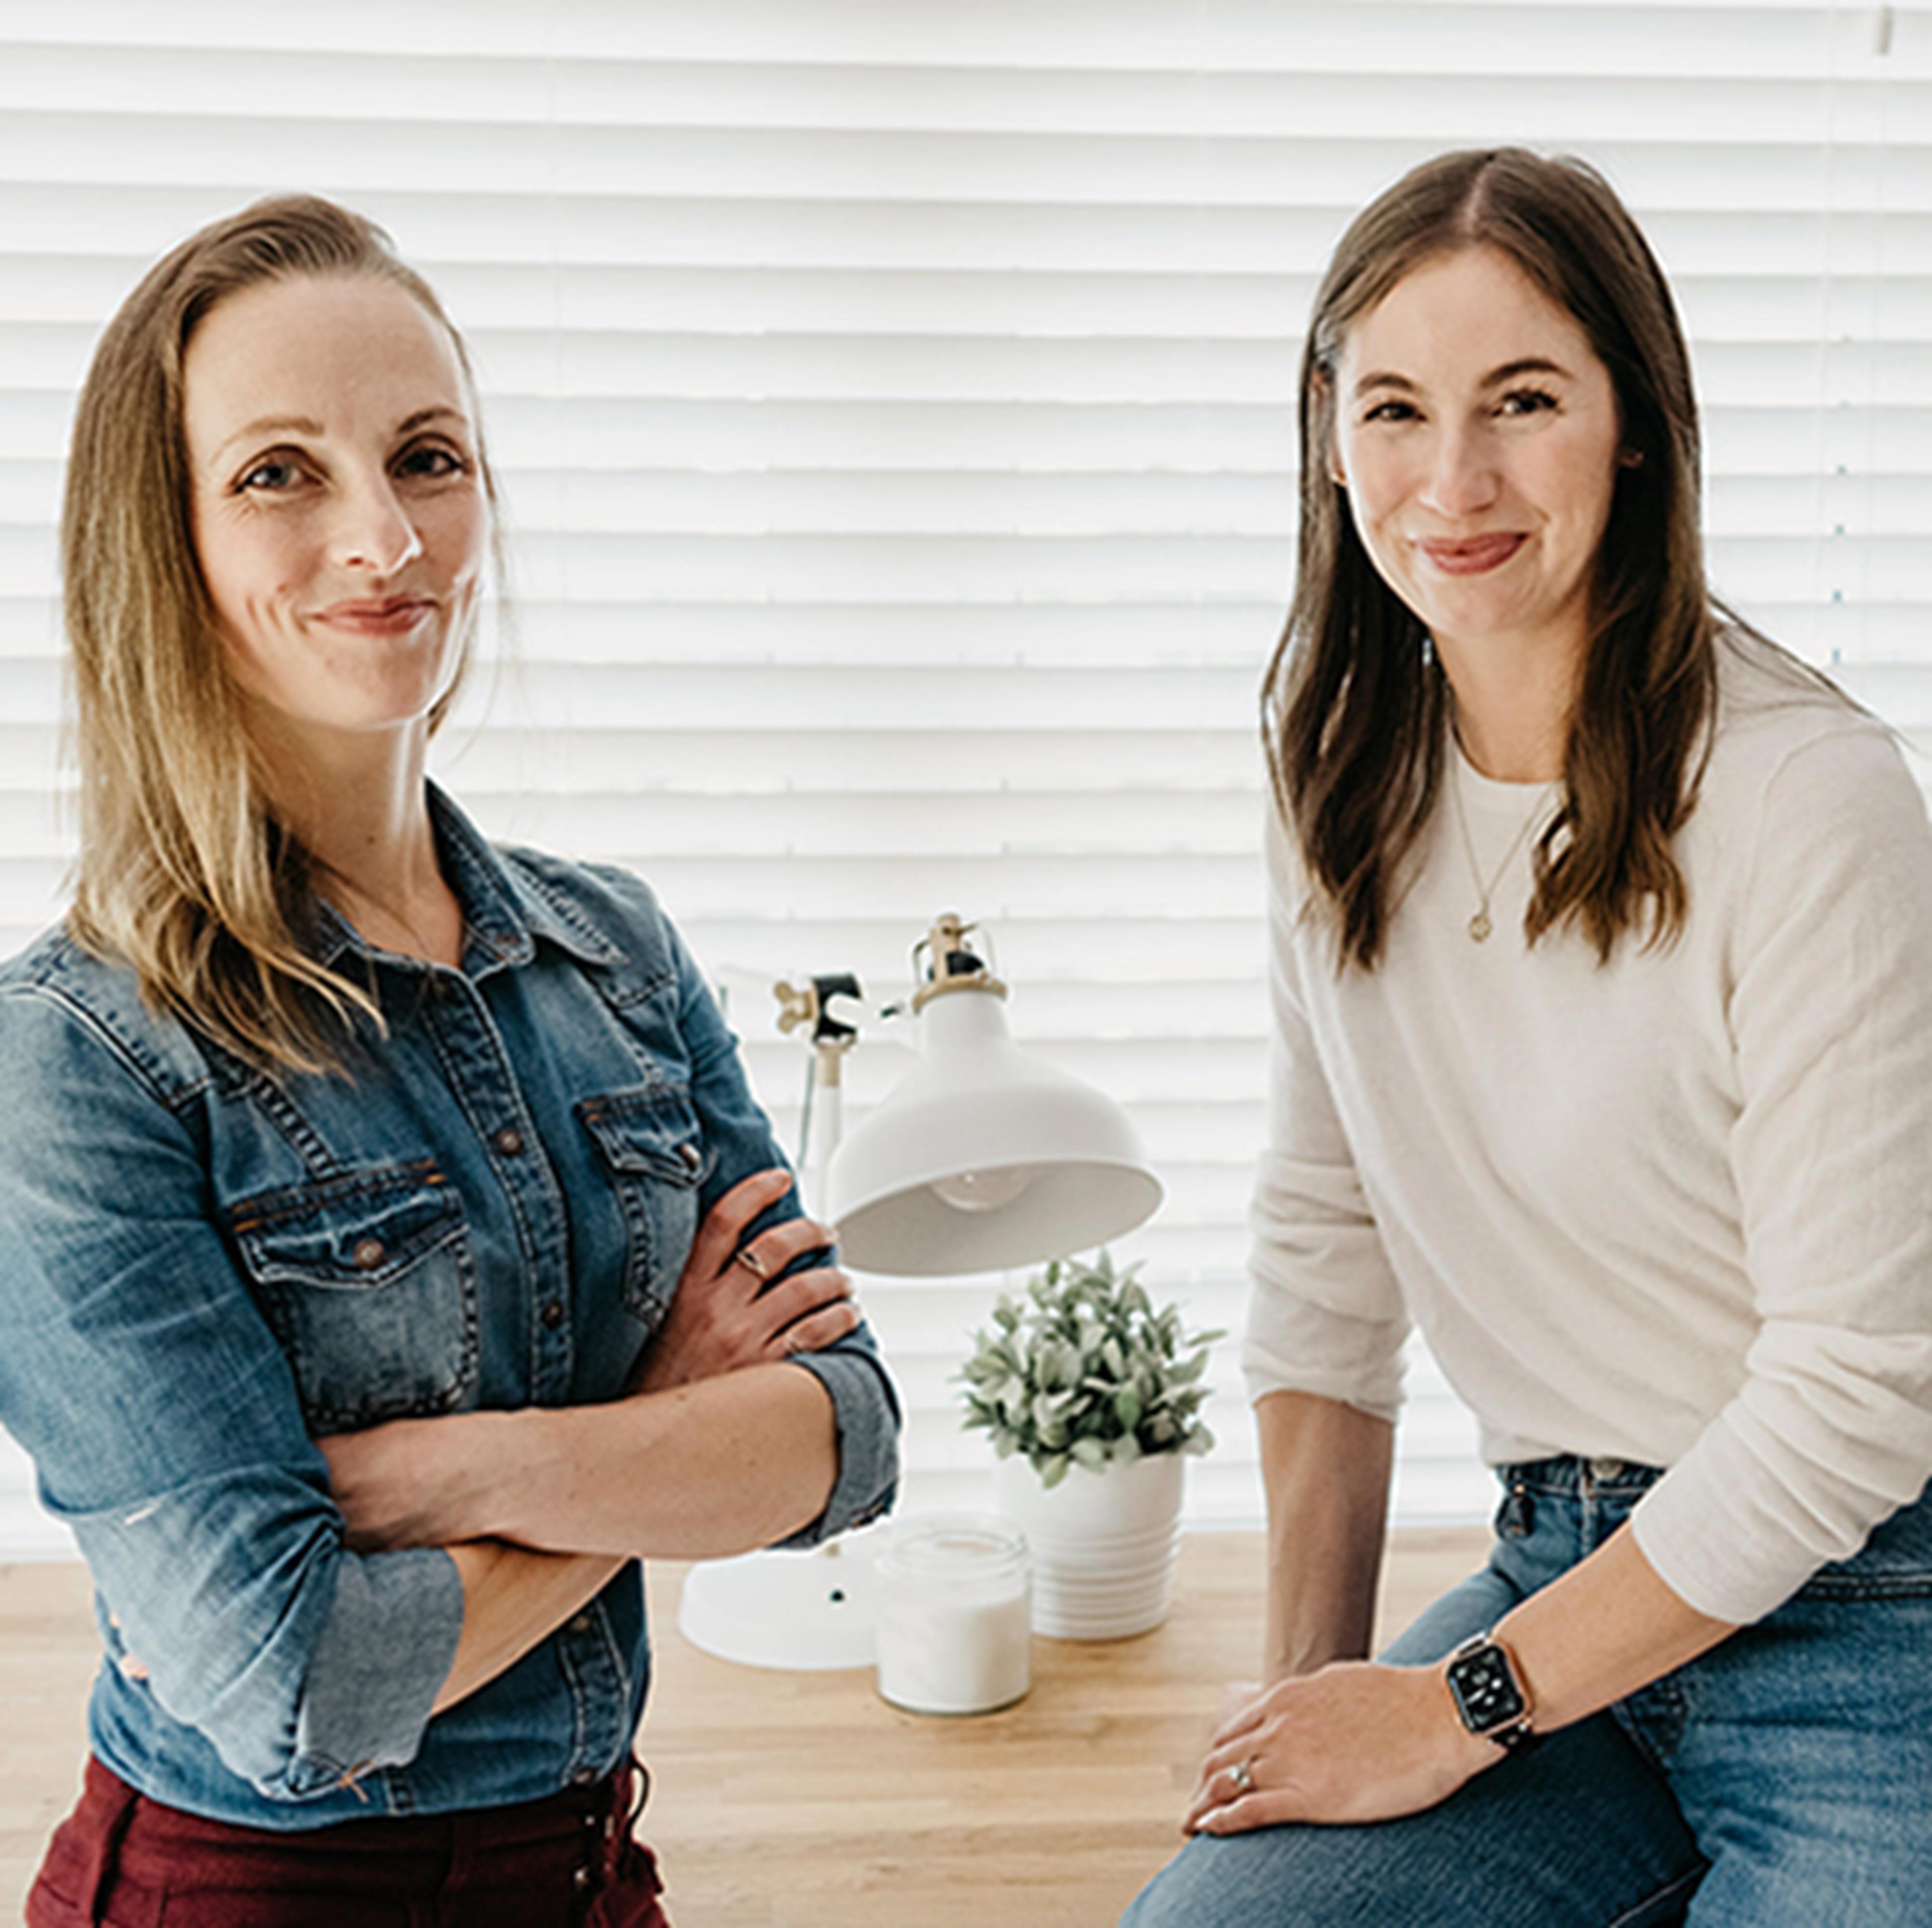 Ashli and Martina standing in front of a window and desk smiling at the camera